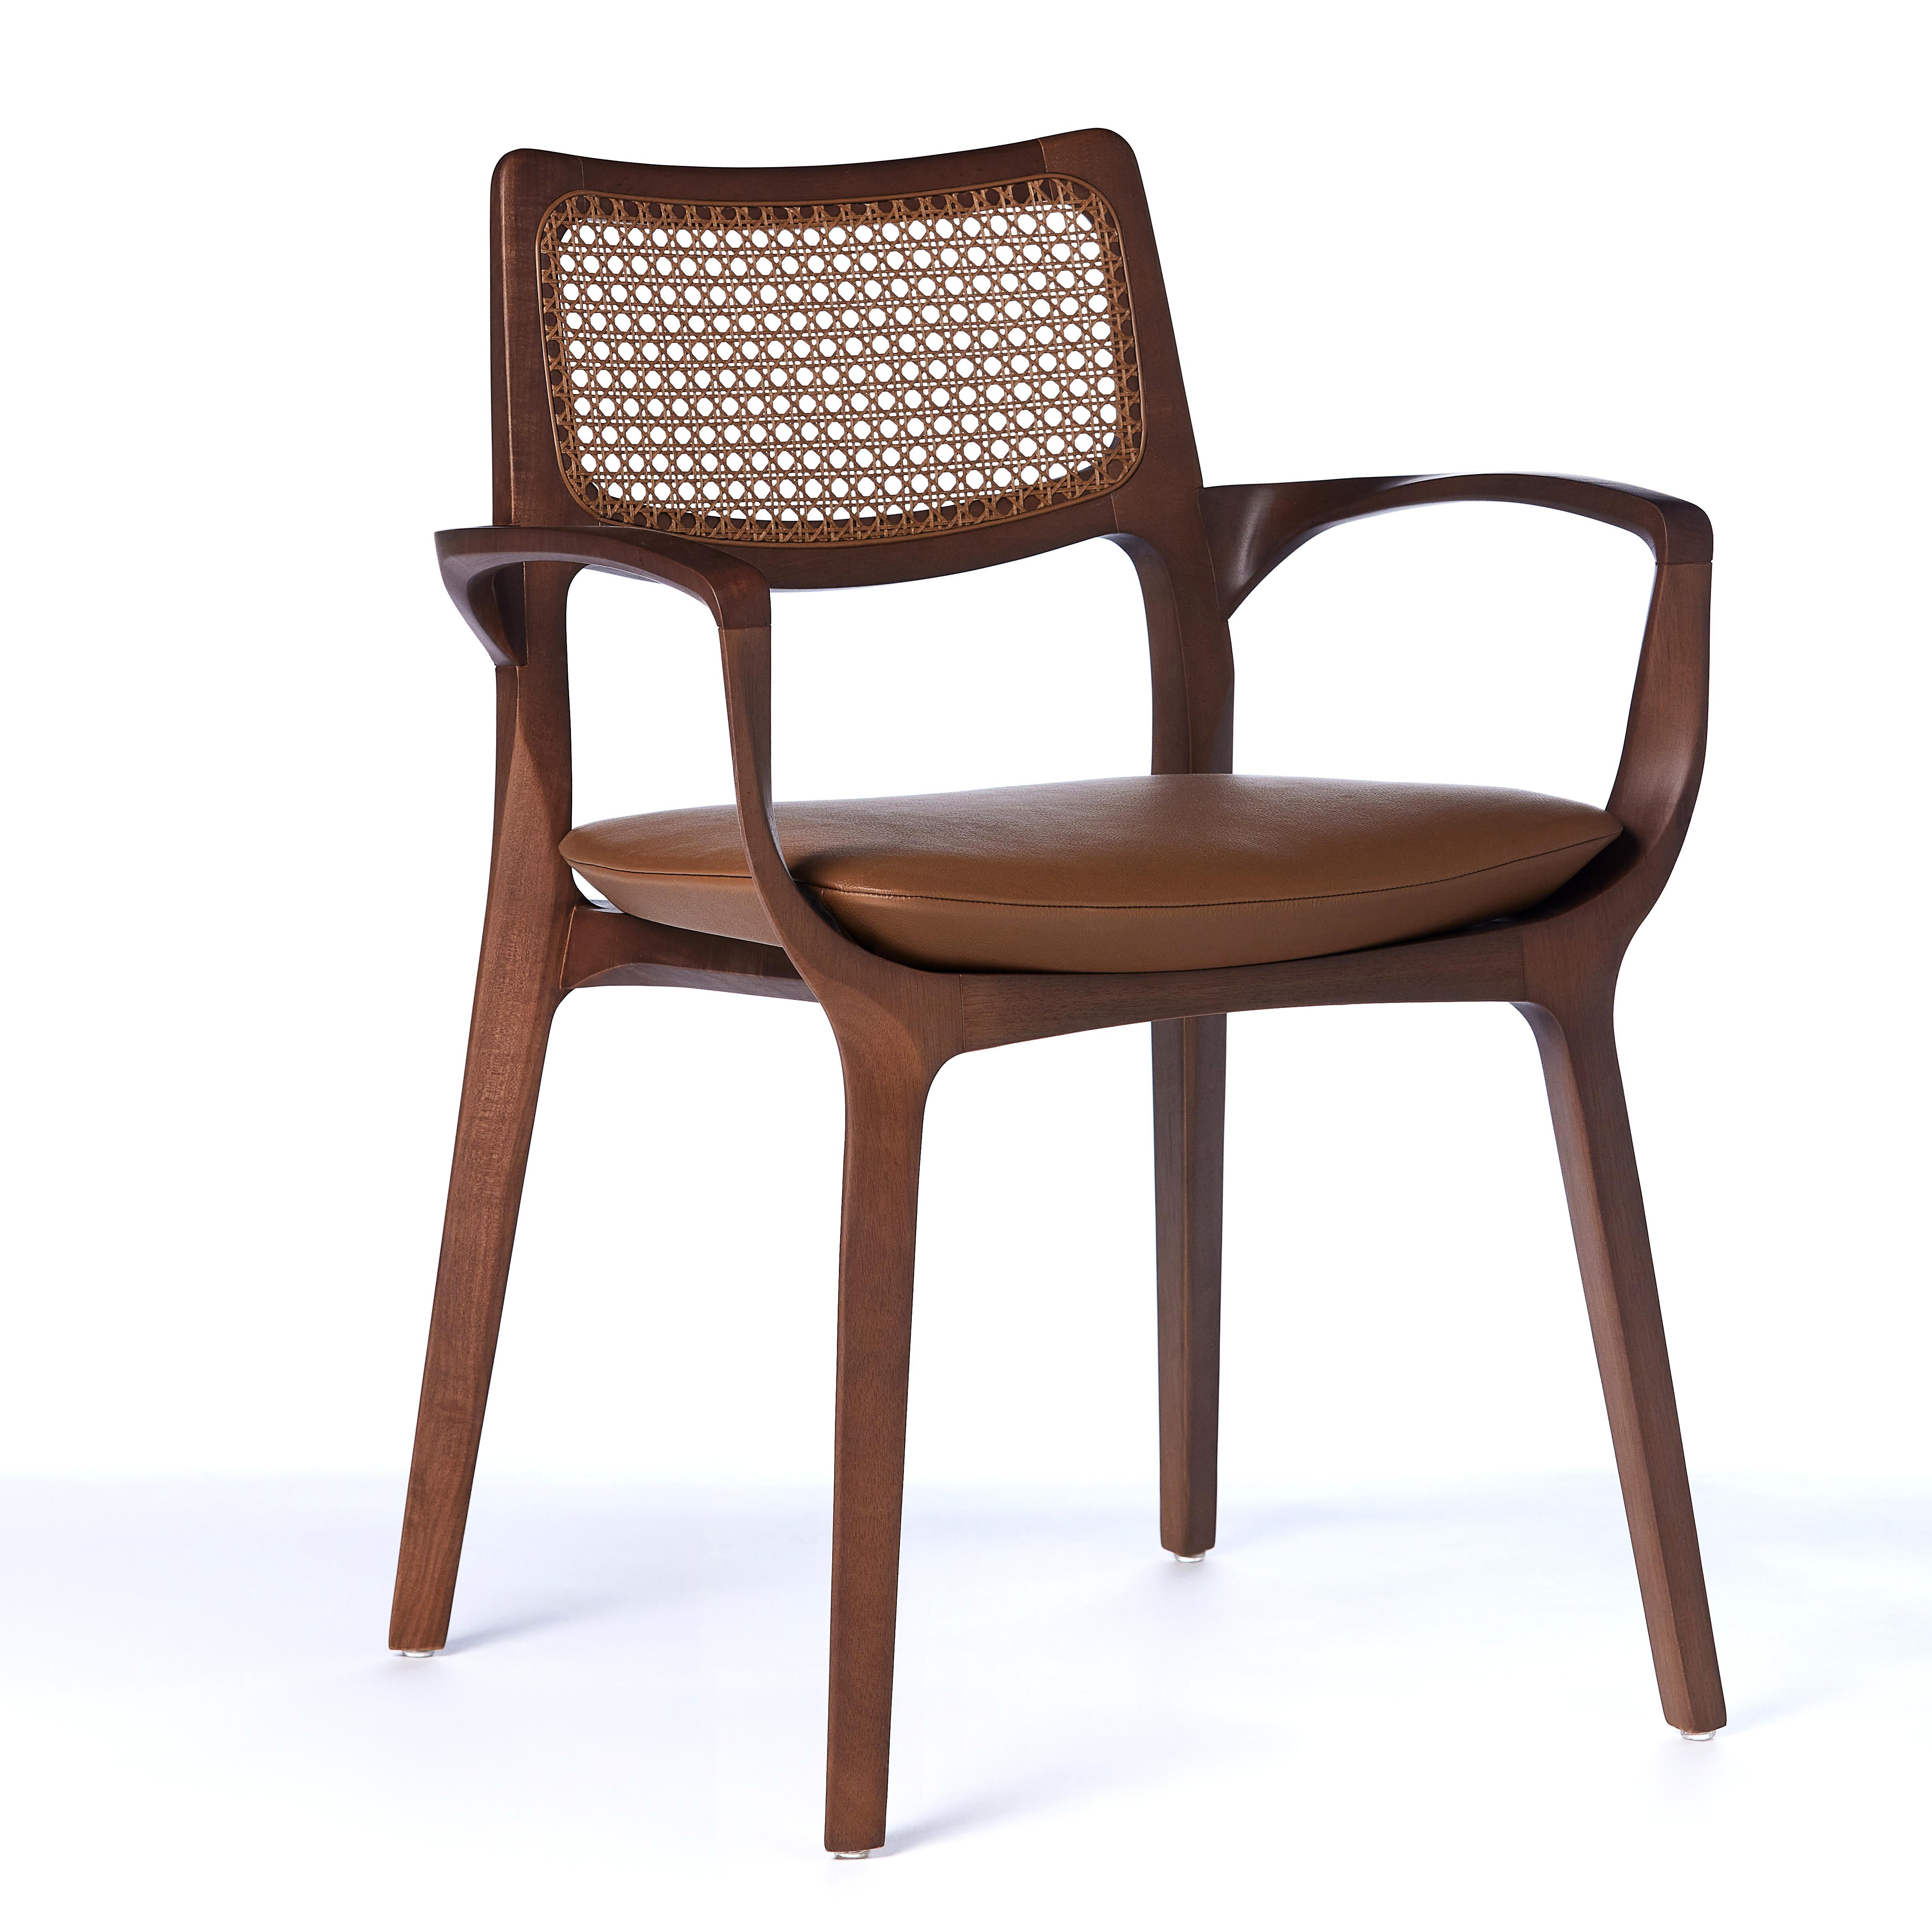 Modern Style Aurora Chair Sculpted in Walnut Finish No Arms, leather seating For Sale 7